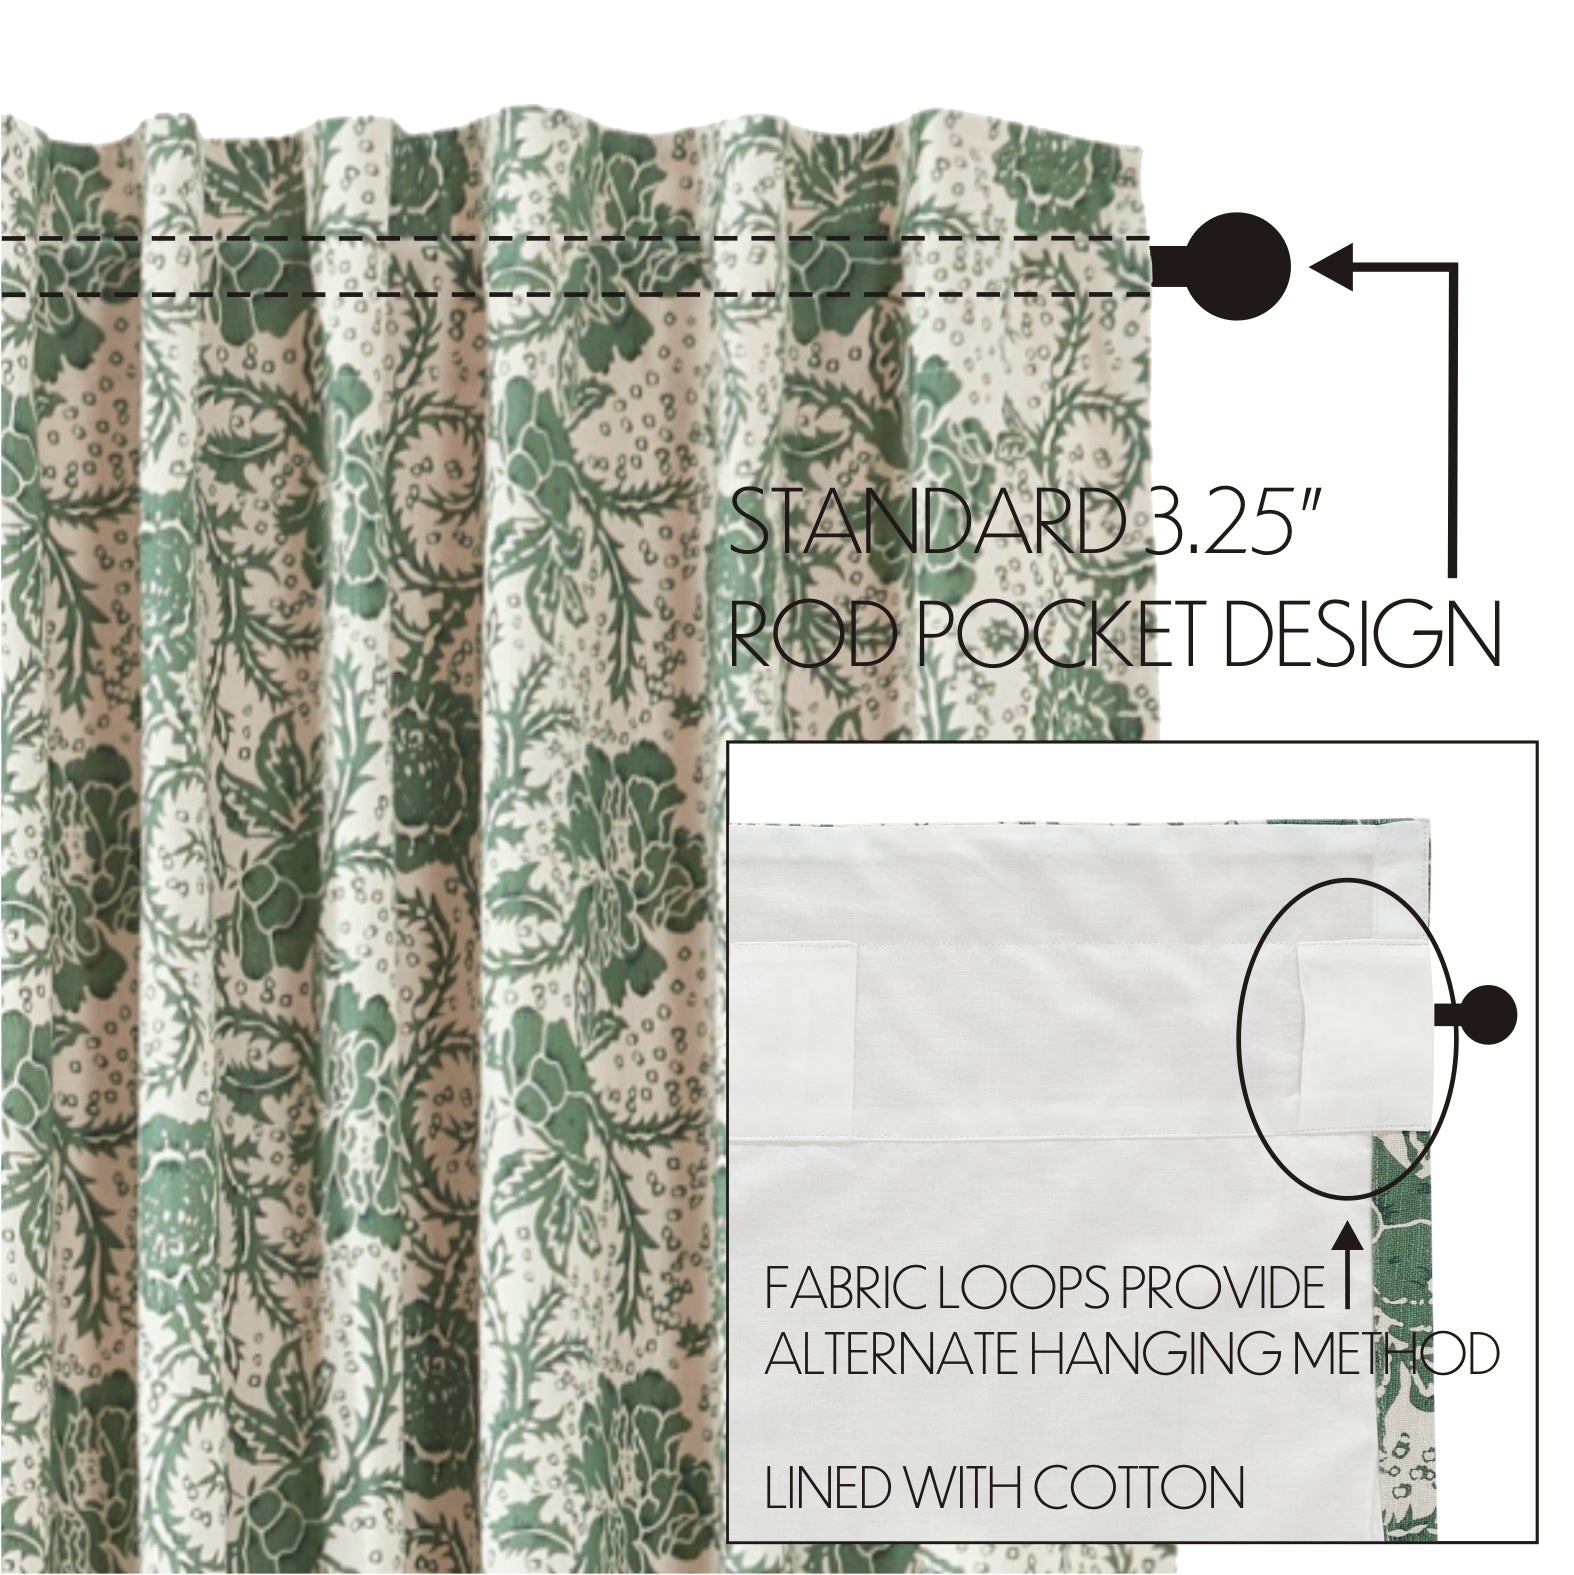 Dorset Green Floral Panel Curtain Set of 2 84x40 VHC Brands